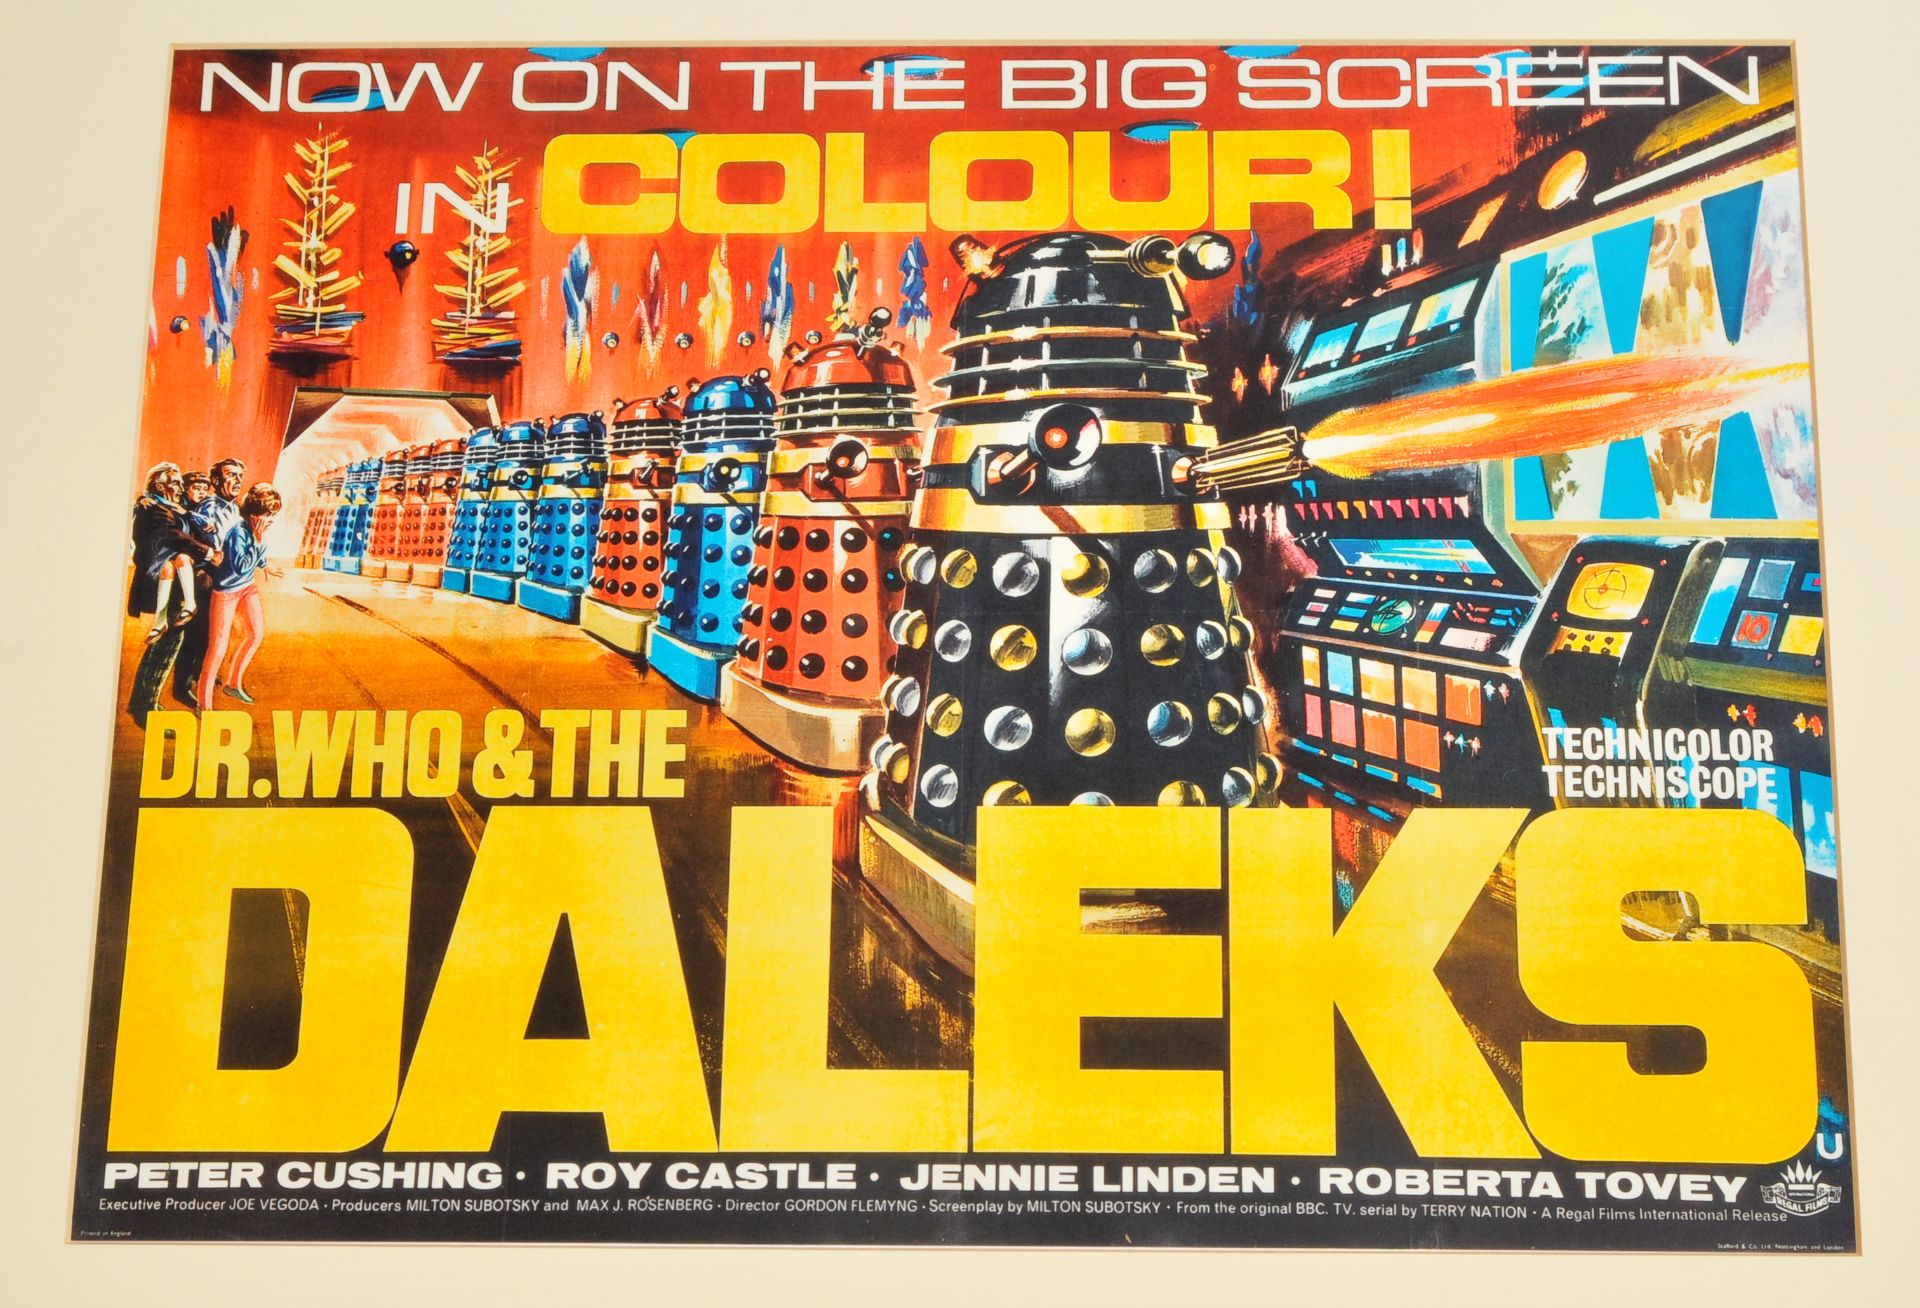 Doctor Who Daleks pair of photographic prints - Image 2 of 3